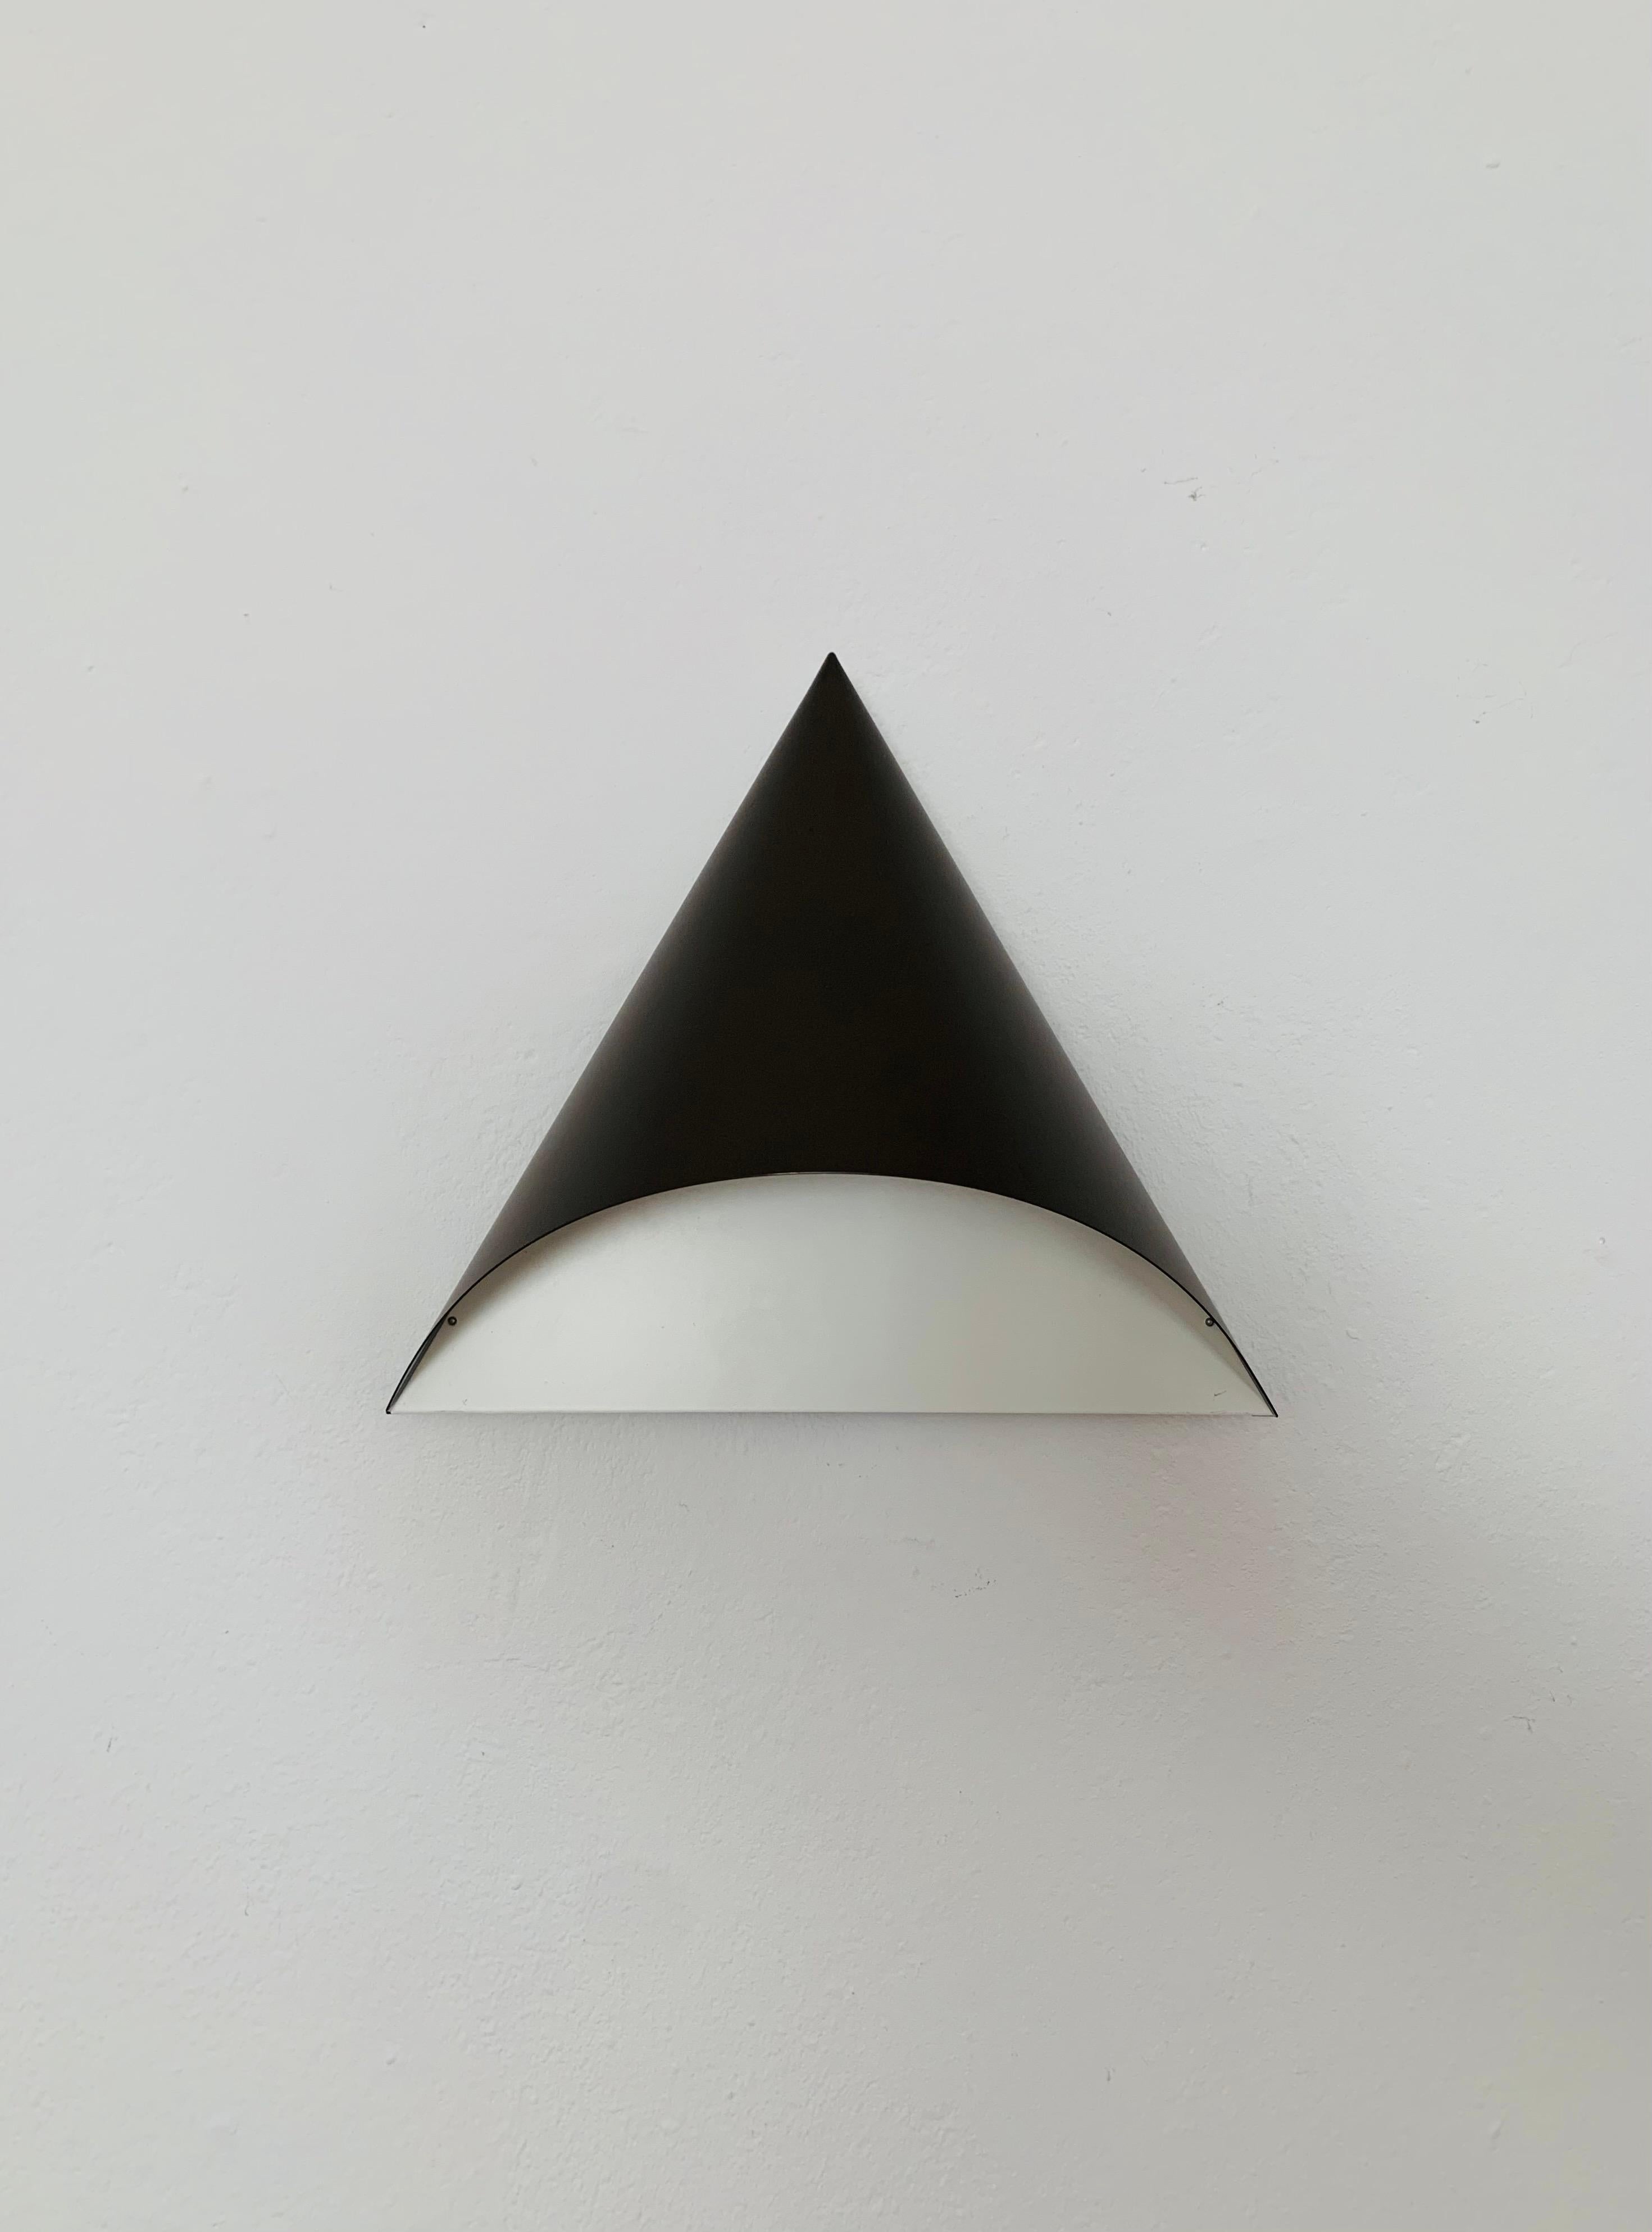 Fantastic wall lamps from the 1970s.
The Staff brand is known for its high-quality workmanship.
A warm light emerges.

Design: R. Krüger and D. Witte
Manufacturer: Staff

The color outside is dark brown.

The pictures are part of the